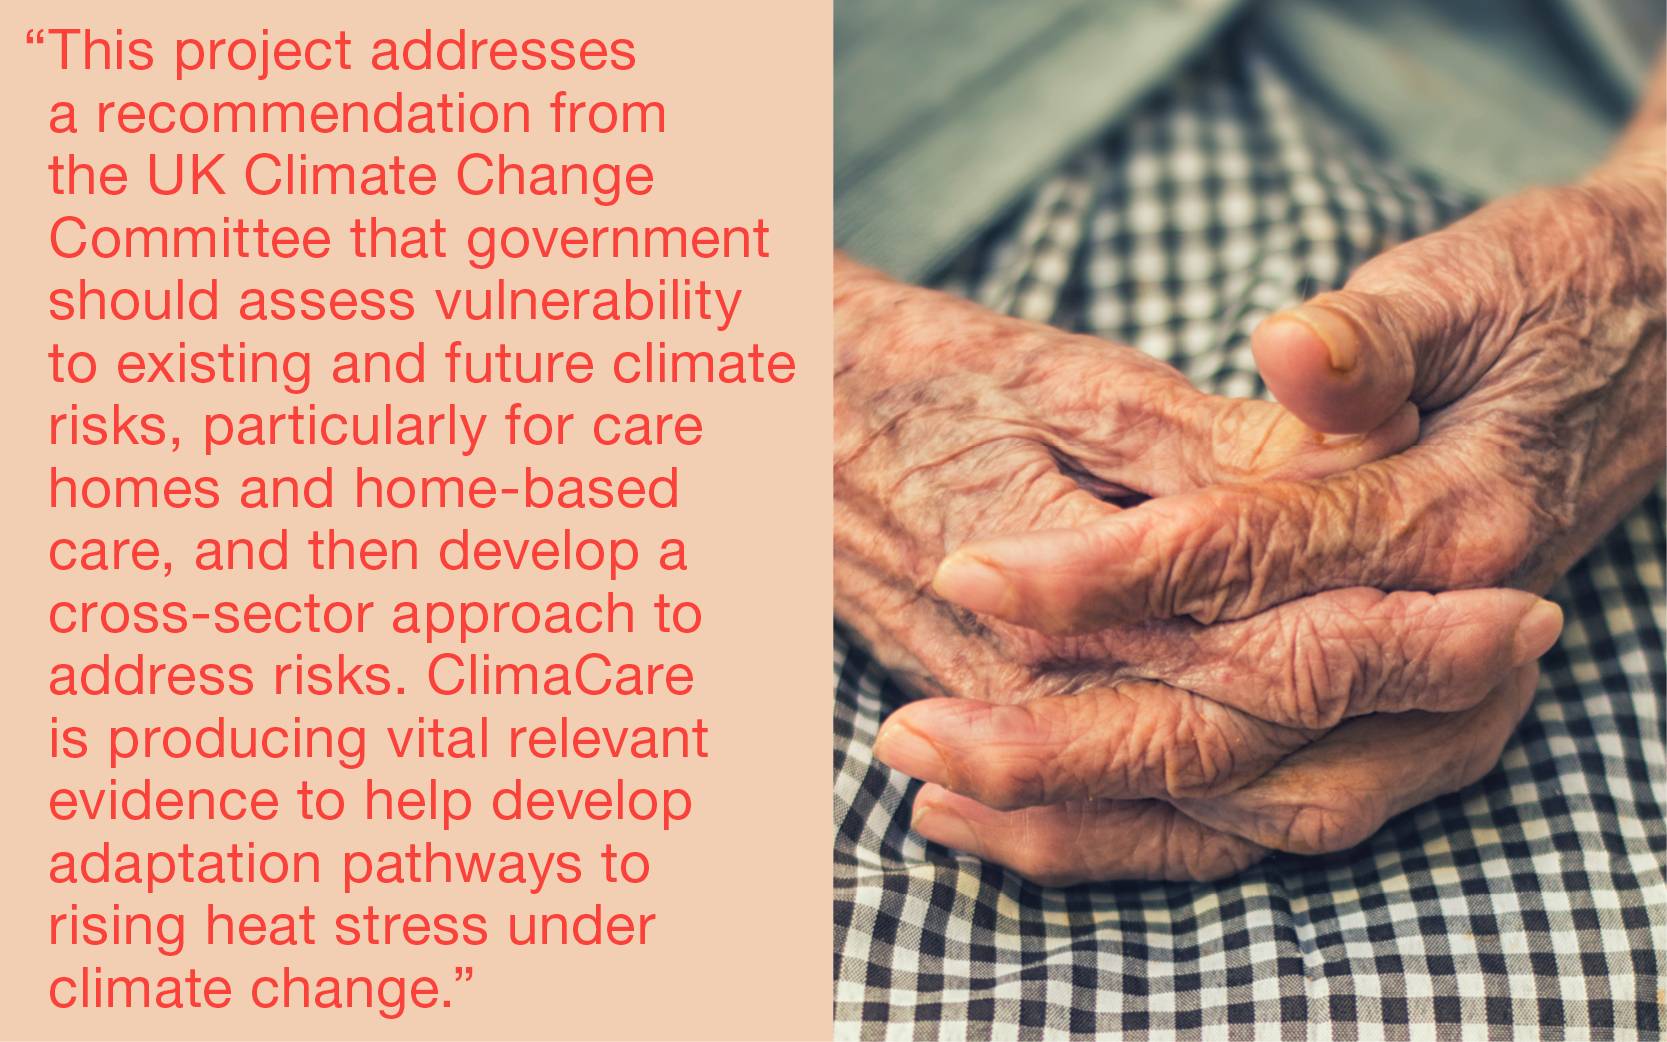 Quote: This project addresses a recommendation from the UK Climate Change Committee that government should assess vulnerability to existing and future climate risks, particularly for care homes and home-based care, and then develop cross-sector solutions